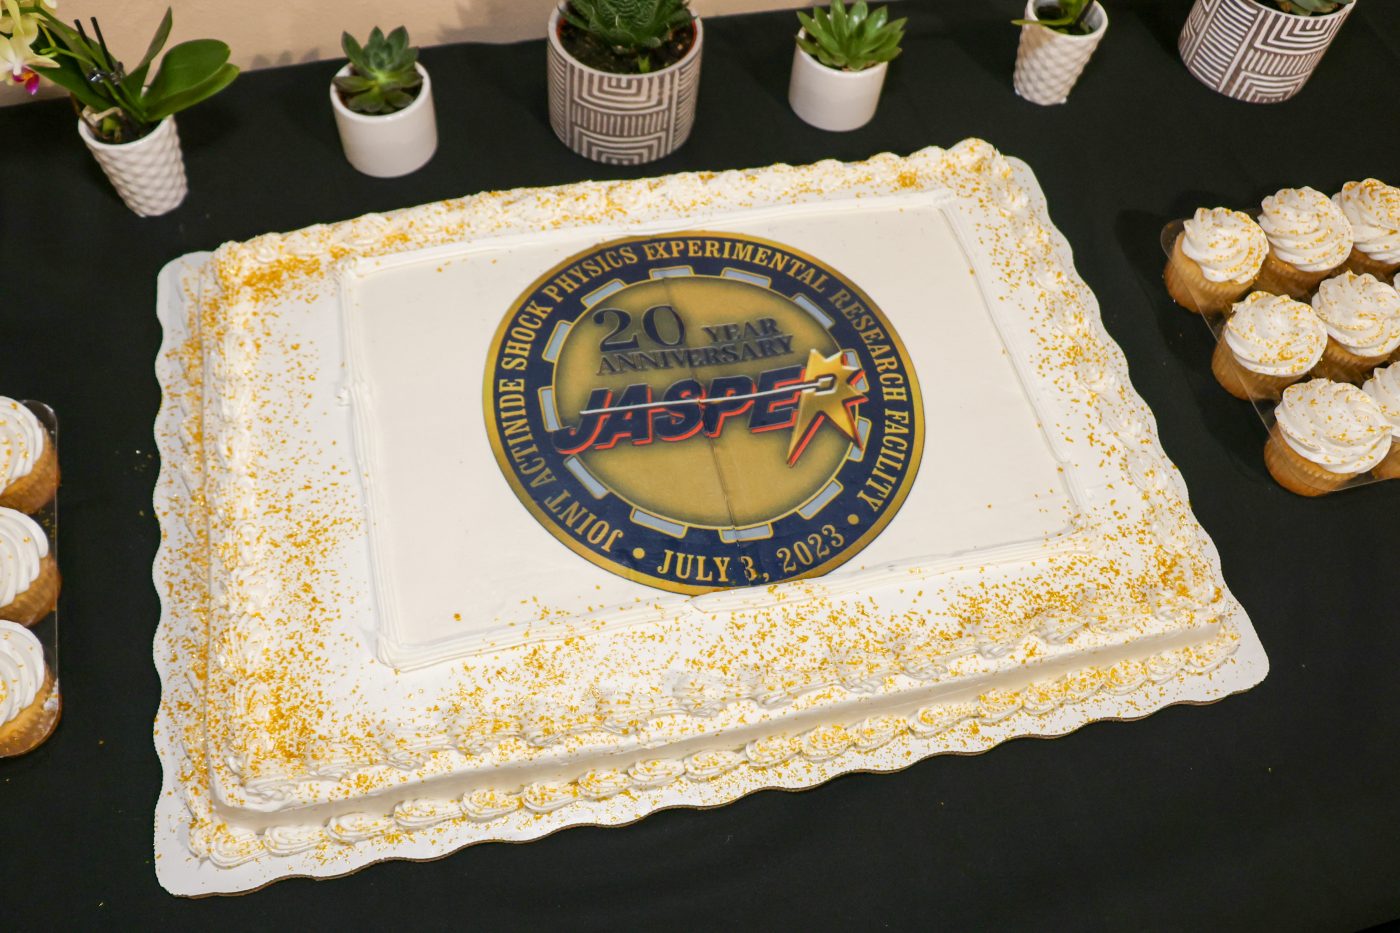 white cake on a table with a yellow, red and blue seal in the middle indicating 20th anniversary of JASPER